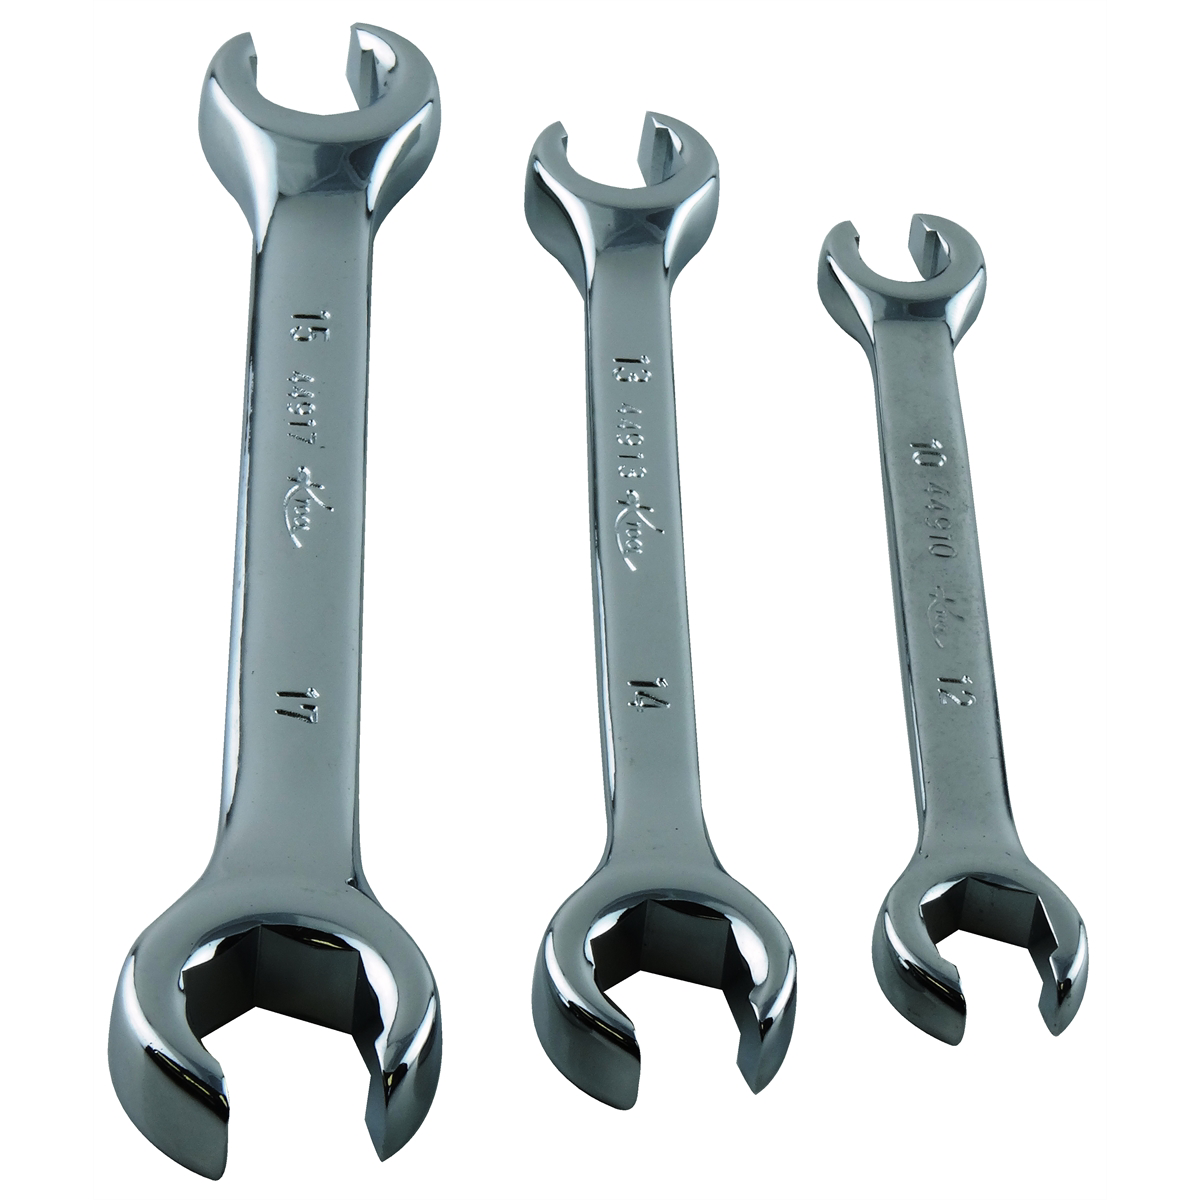 Metric Flare Nut Wrench Set - 3 Piece